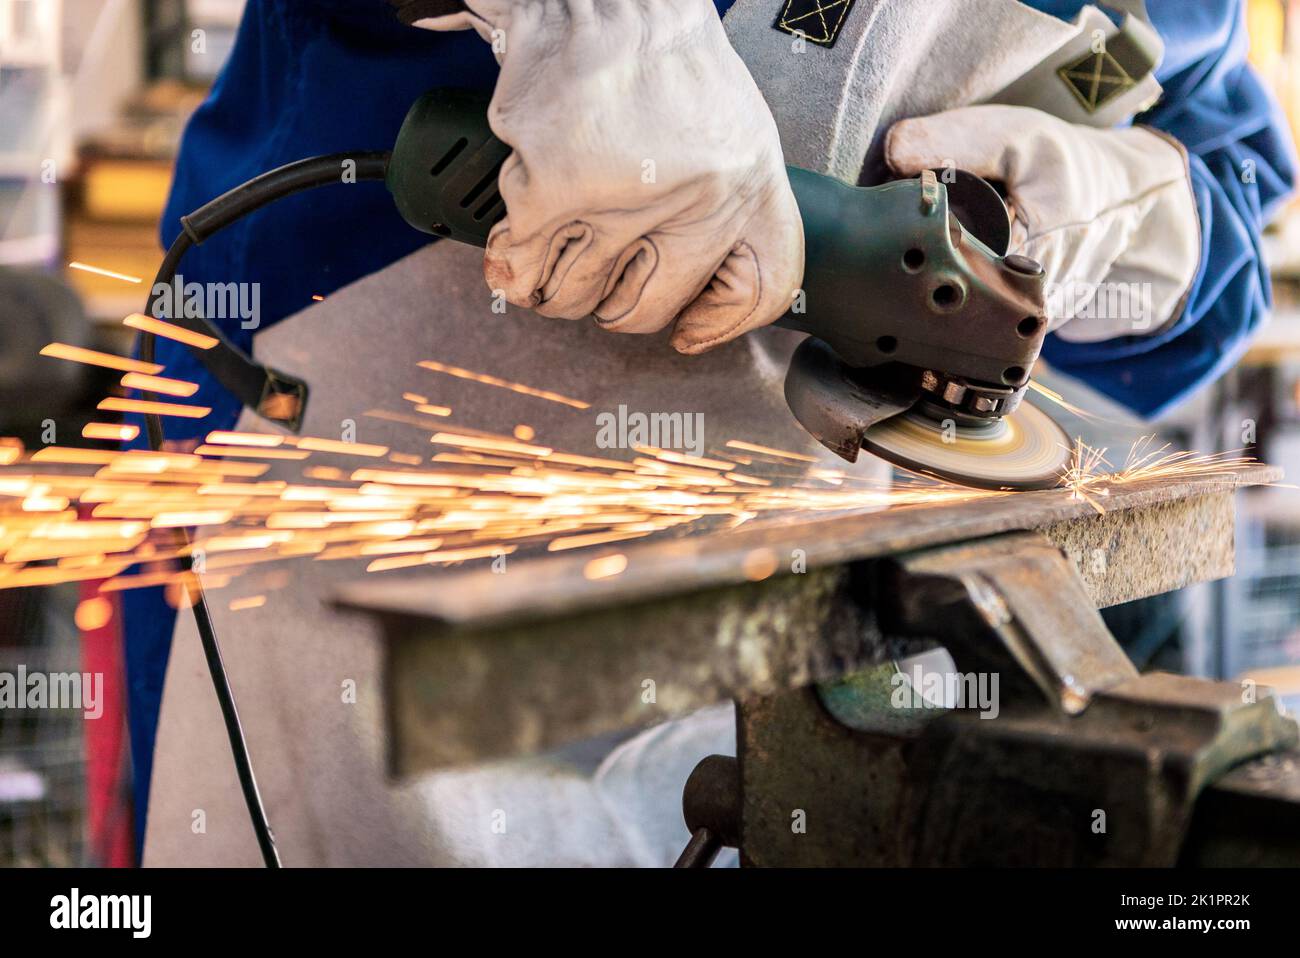 Worker in special clothes and goggles grinding metal with a circular saw in his workshop, bright sparks of metalworking fly in different directions. Stock Photo